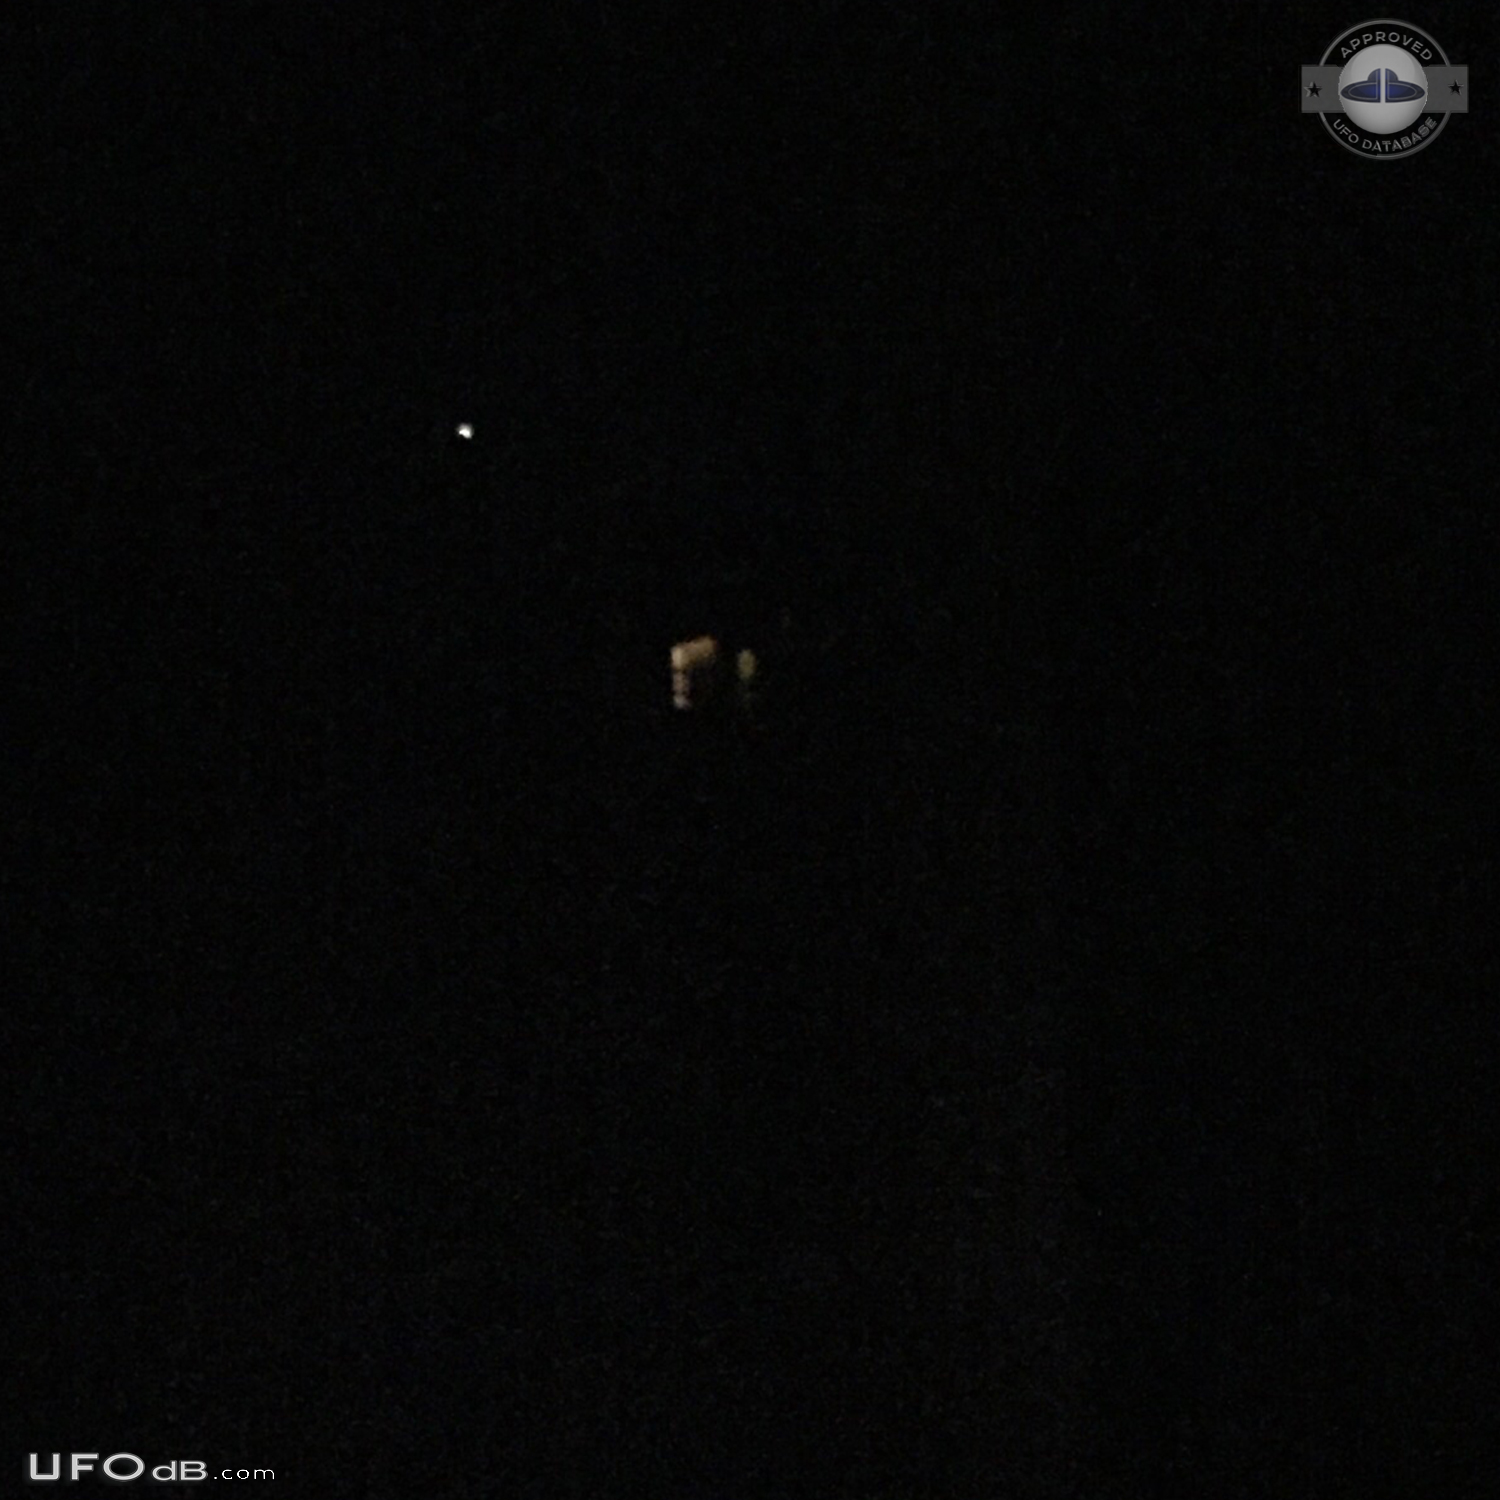 Wife see strange looking UFO and take picture - Pawling New York USA 2 UFO Picture #785-2